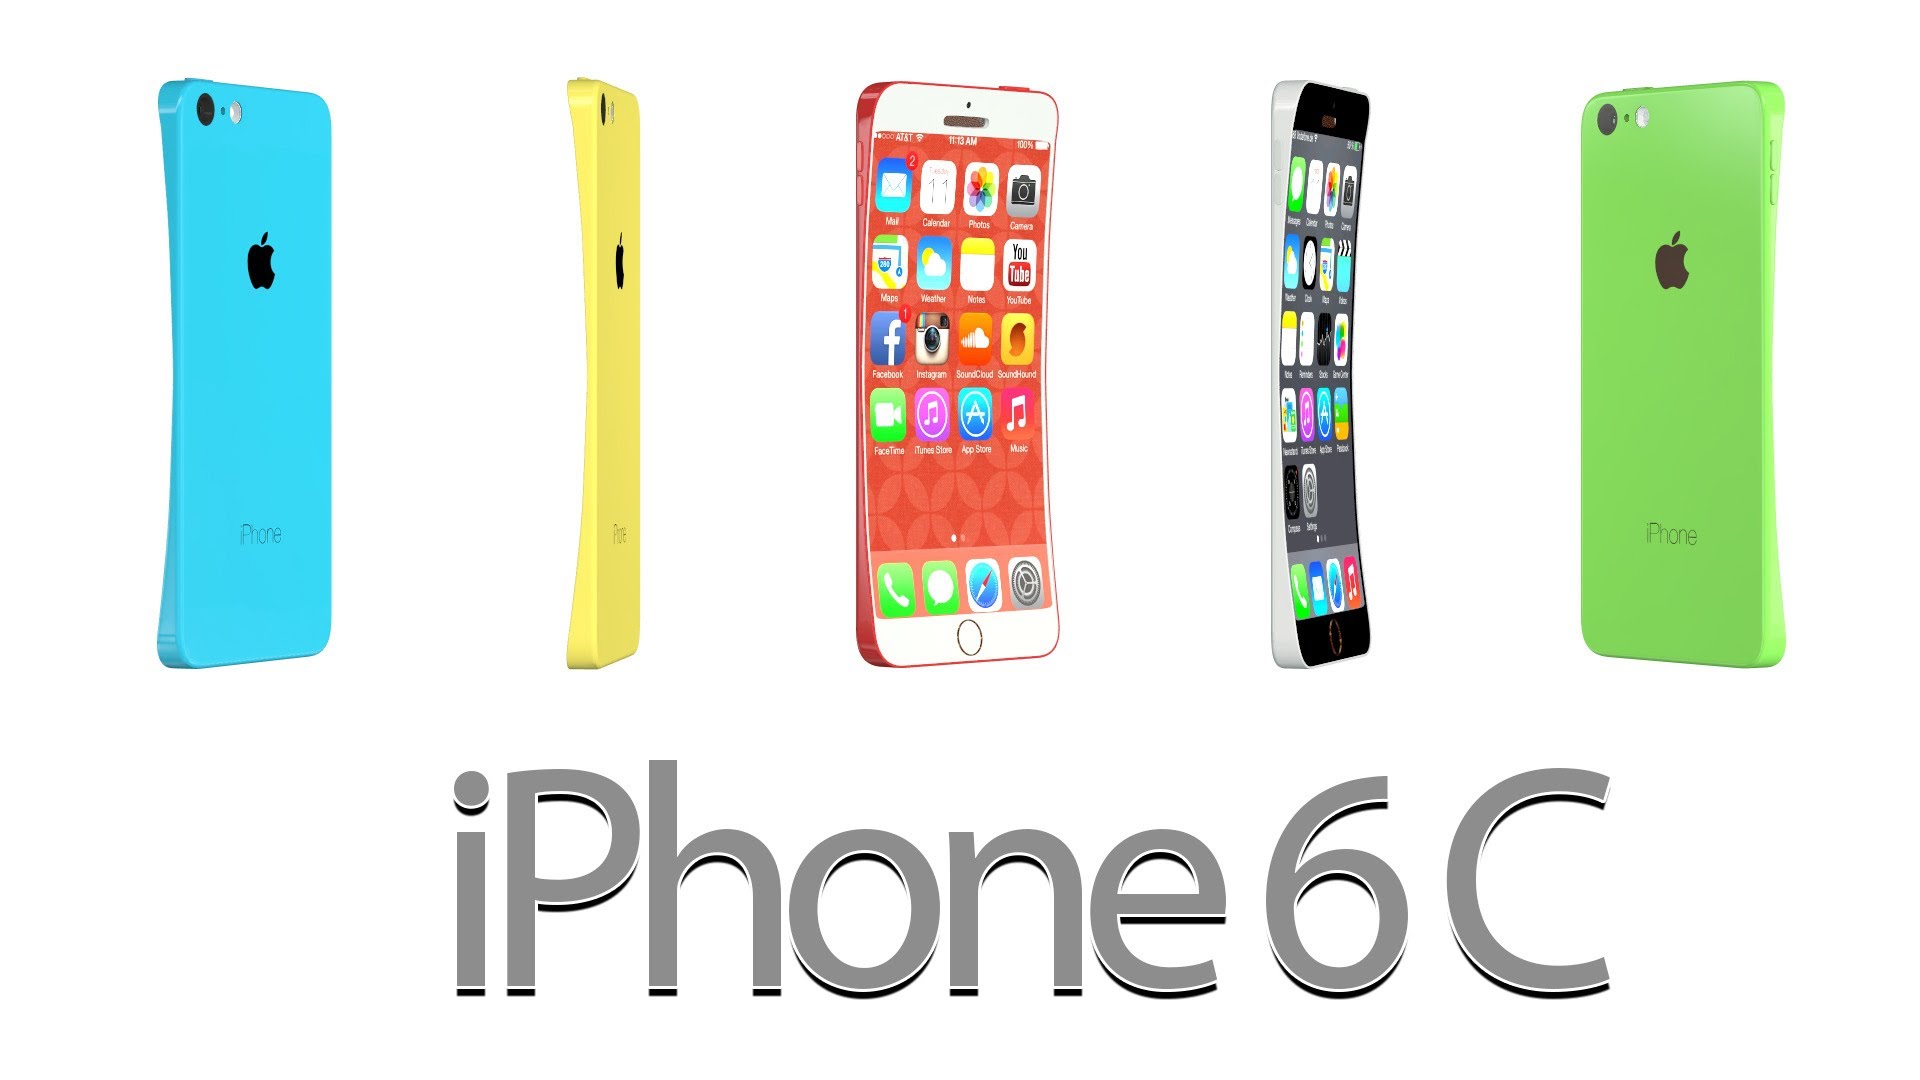 iPhone 6c in 2016 all thing need to know from TechViral